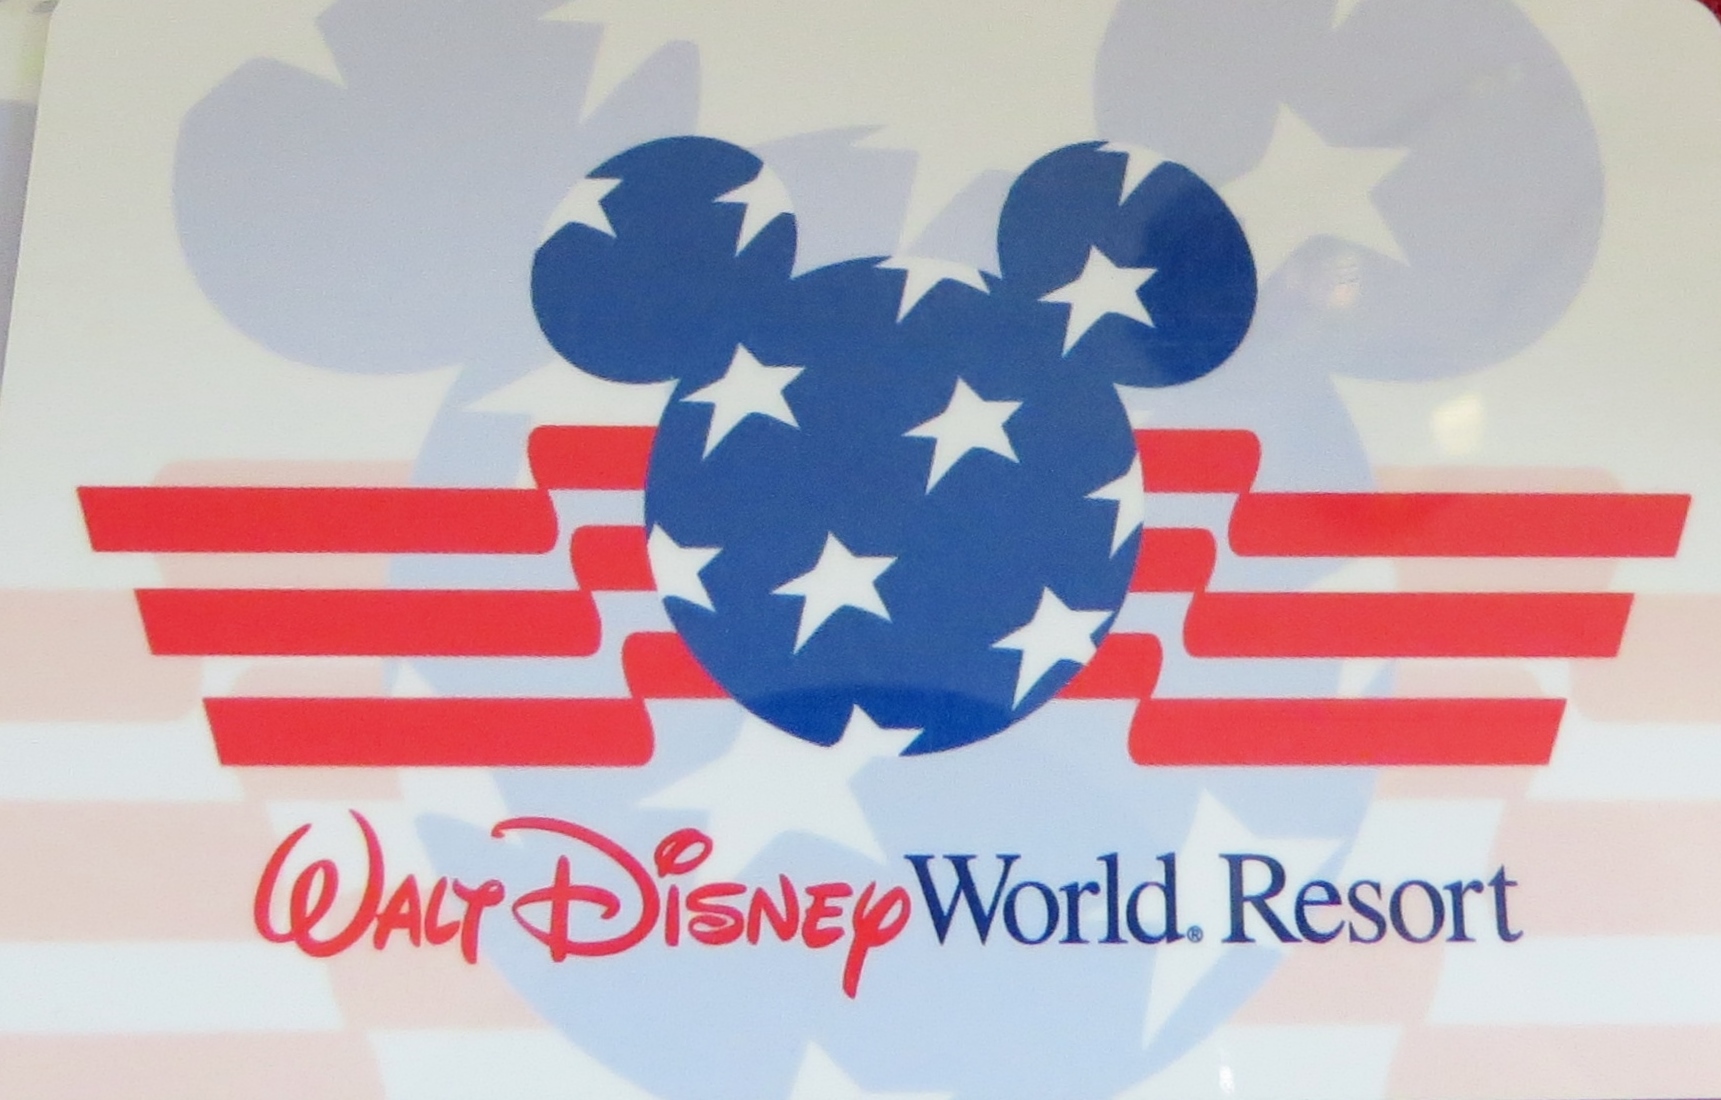 The 2018 Disney Military Discounts!! Salute and Thanks to the Disney Travel Company